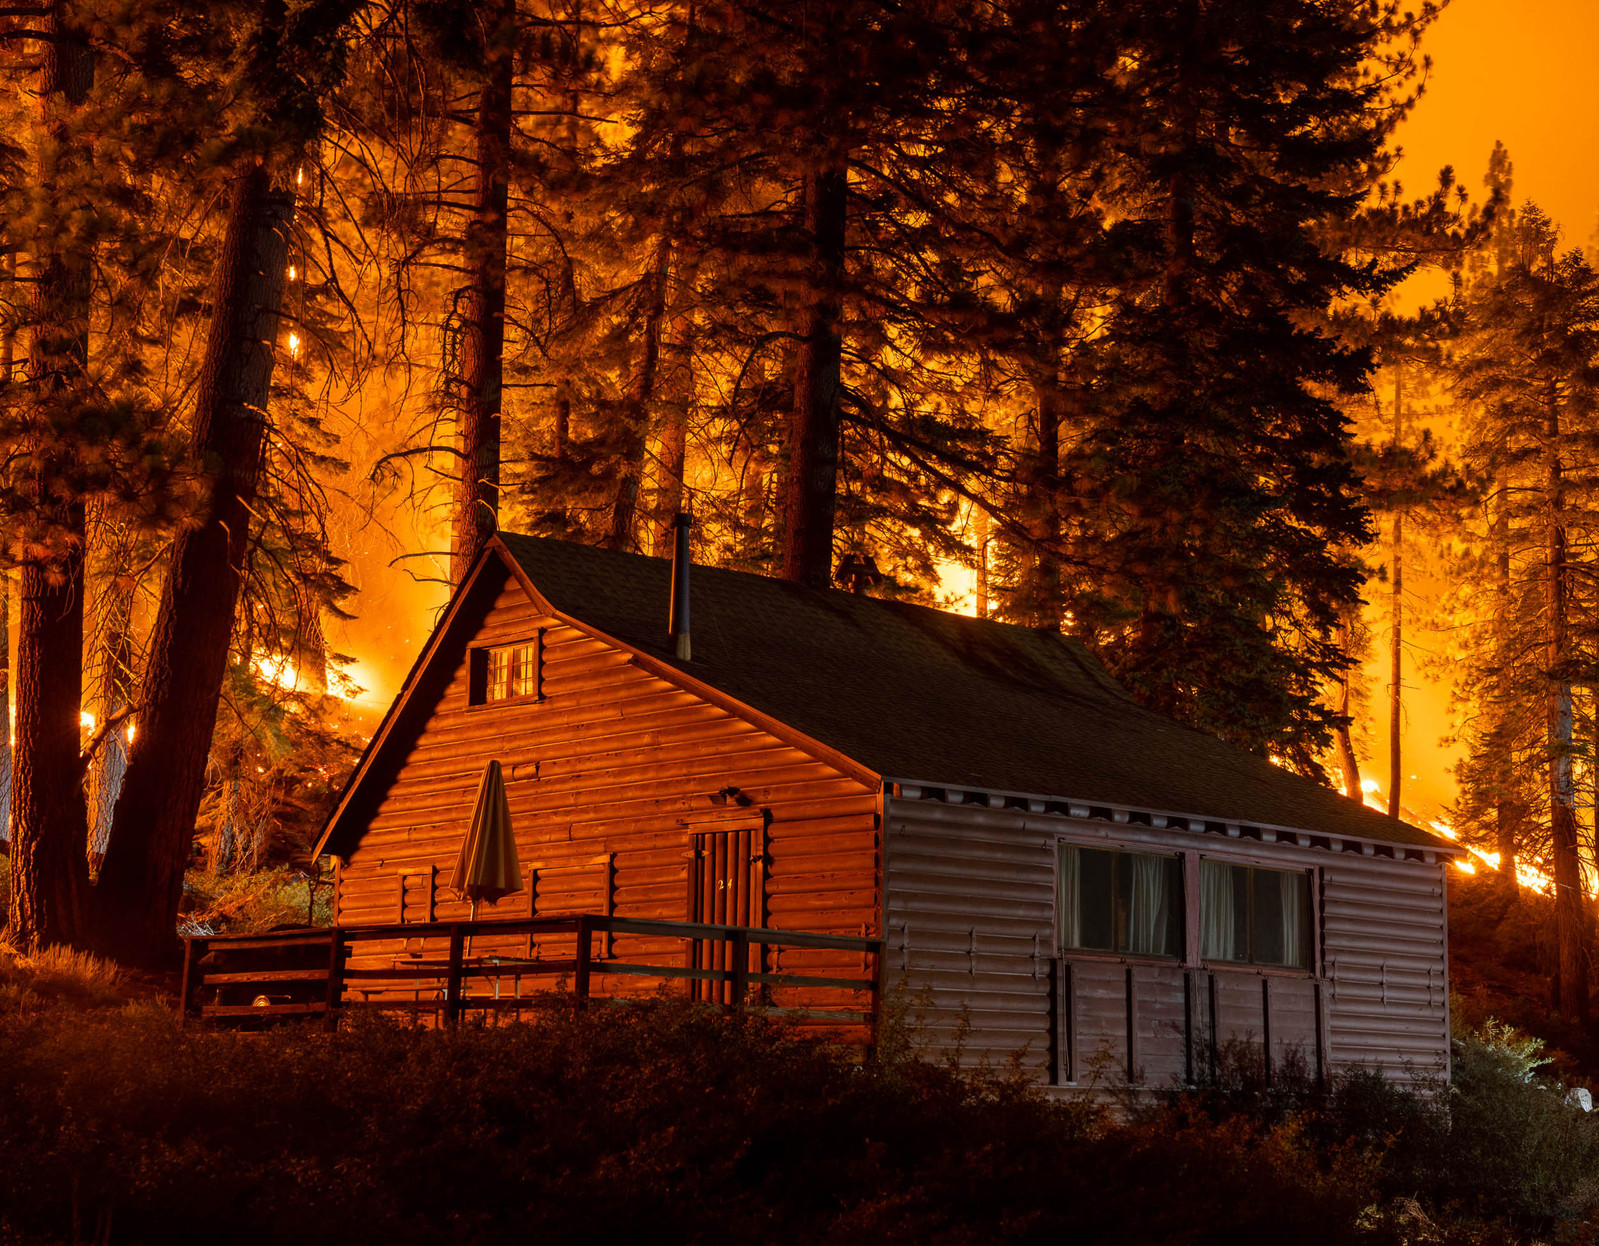 The Terrifying Choices Created by Wildfires / Photo by Kevin Cooley